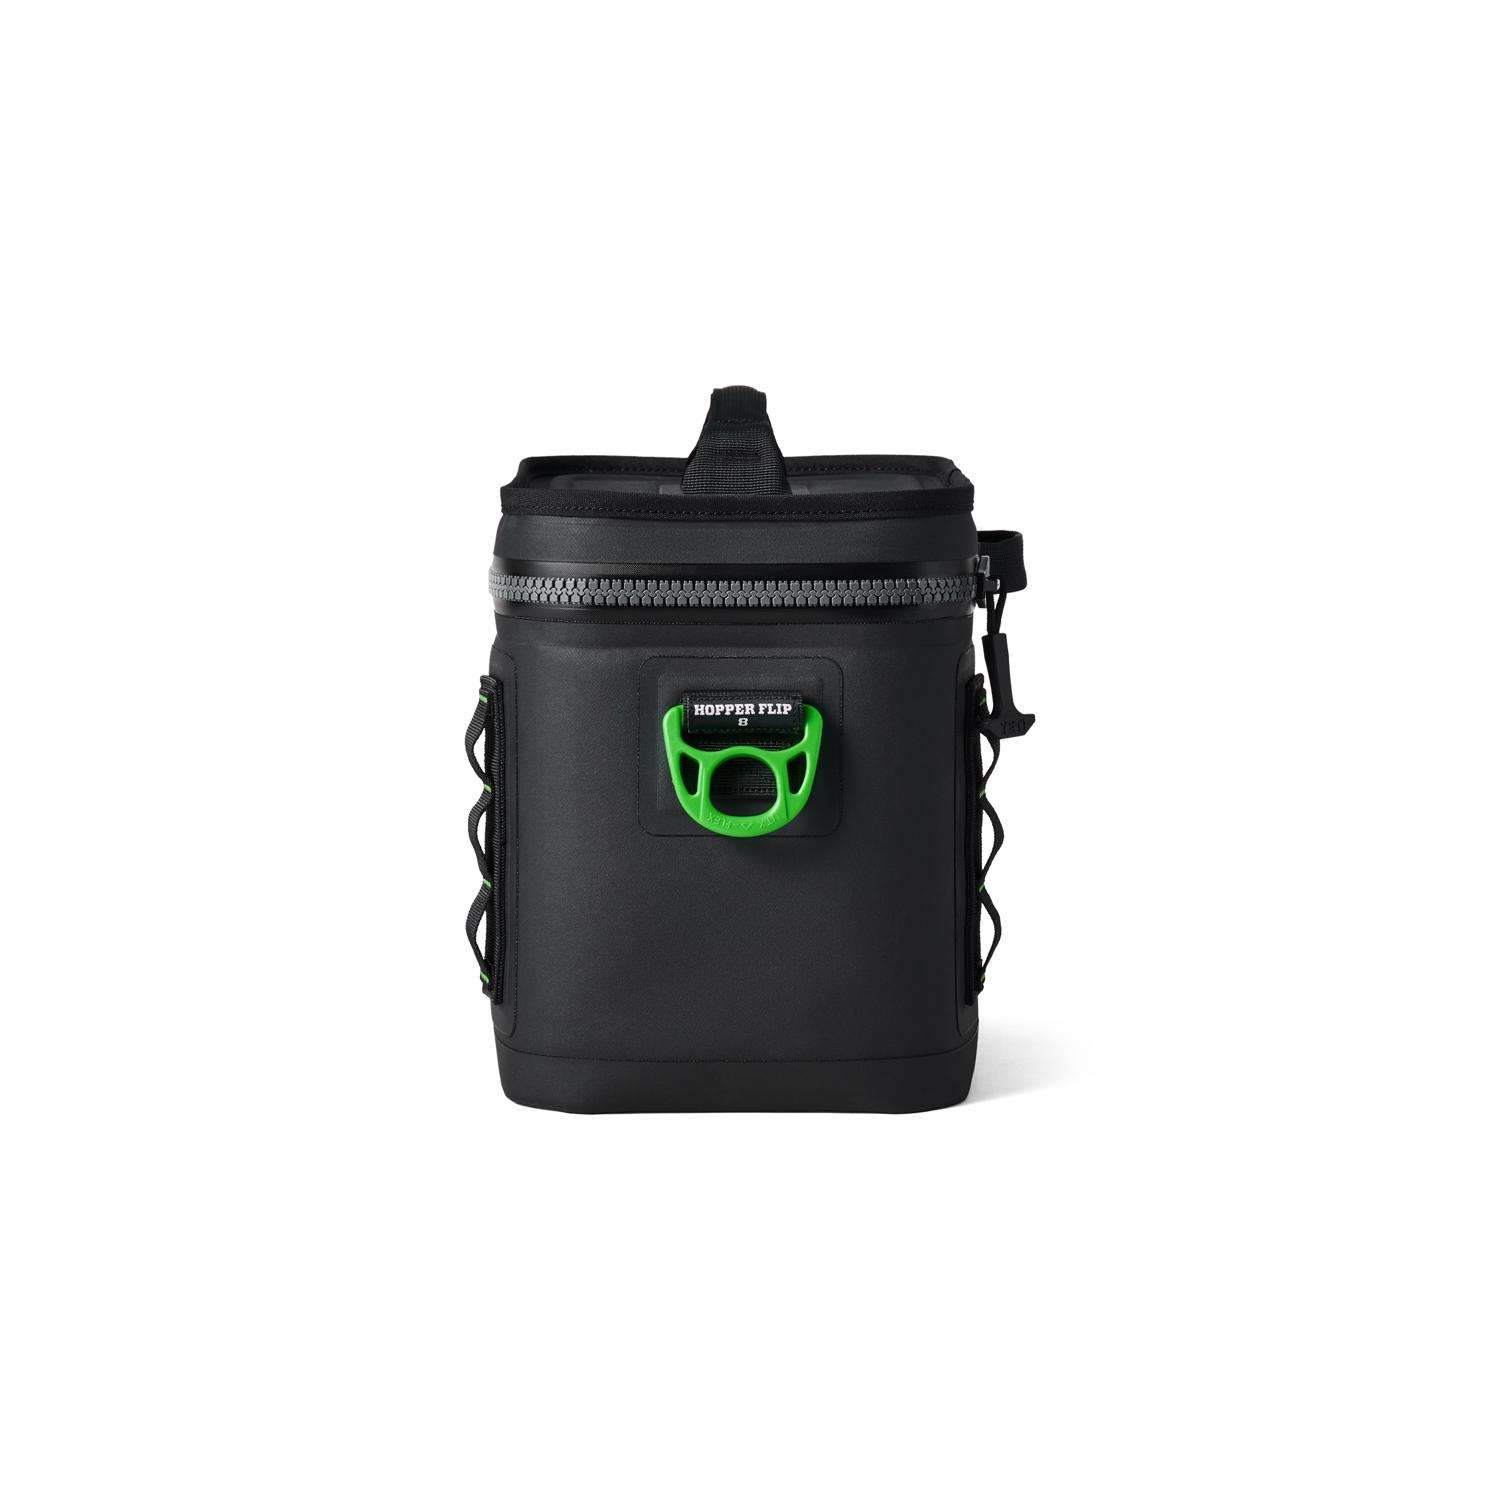 YETI Hopper Flip 12 Soft Cooler Limited Color - Canopy Green